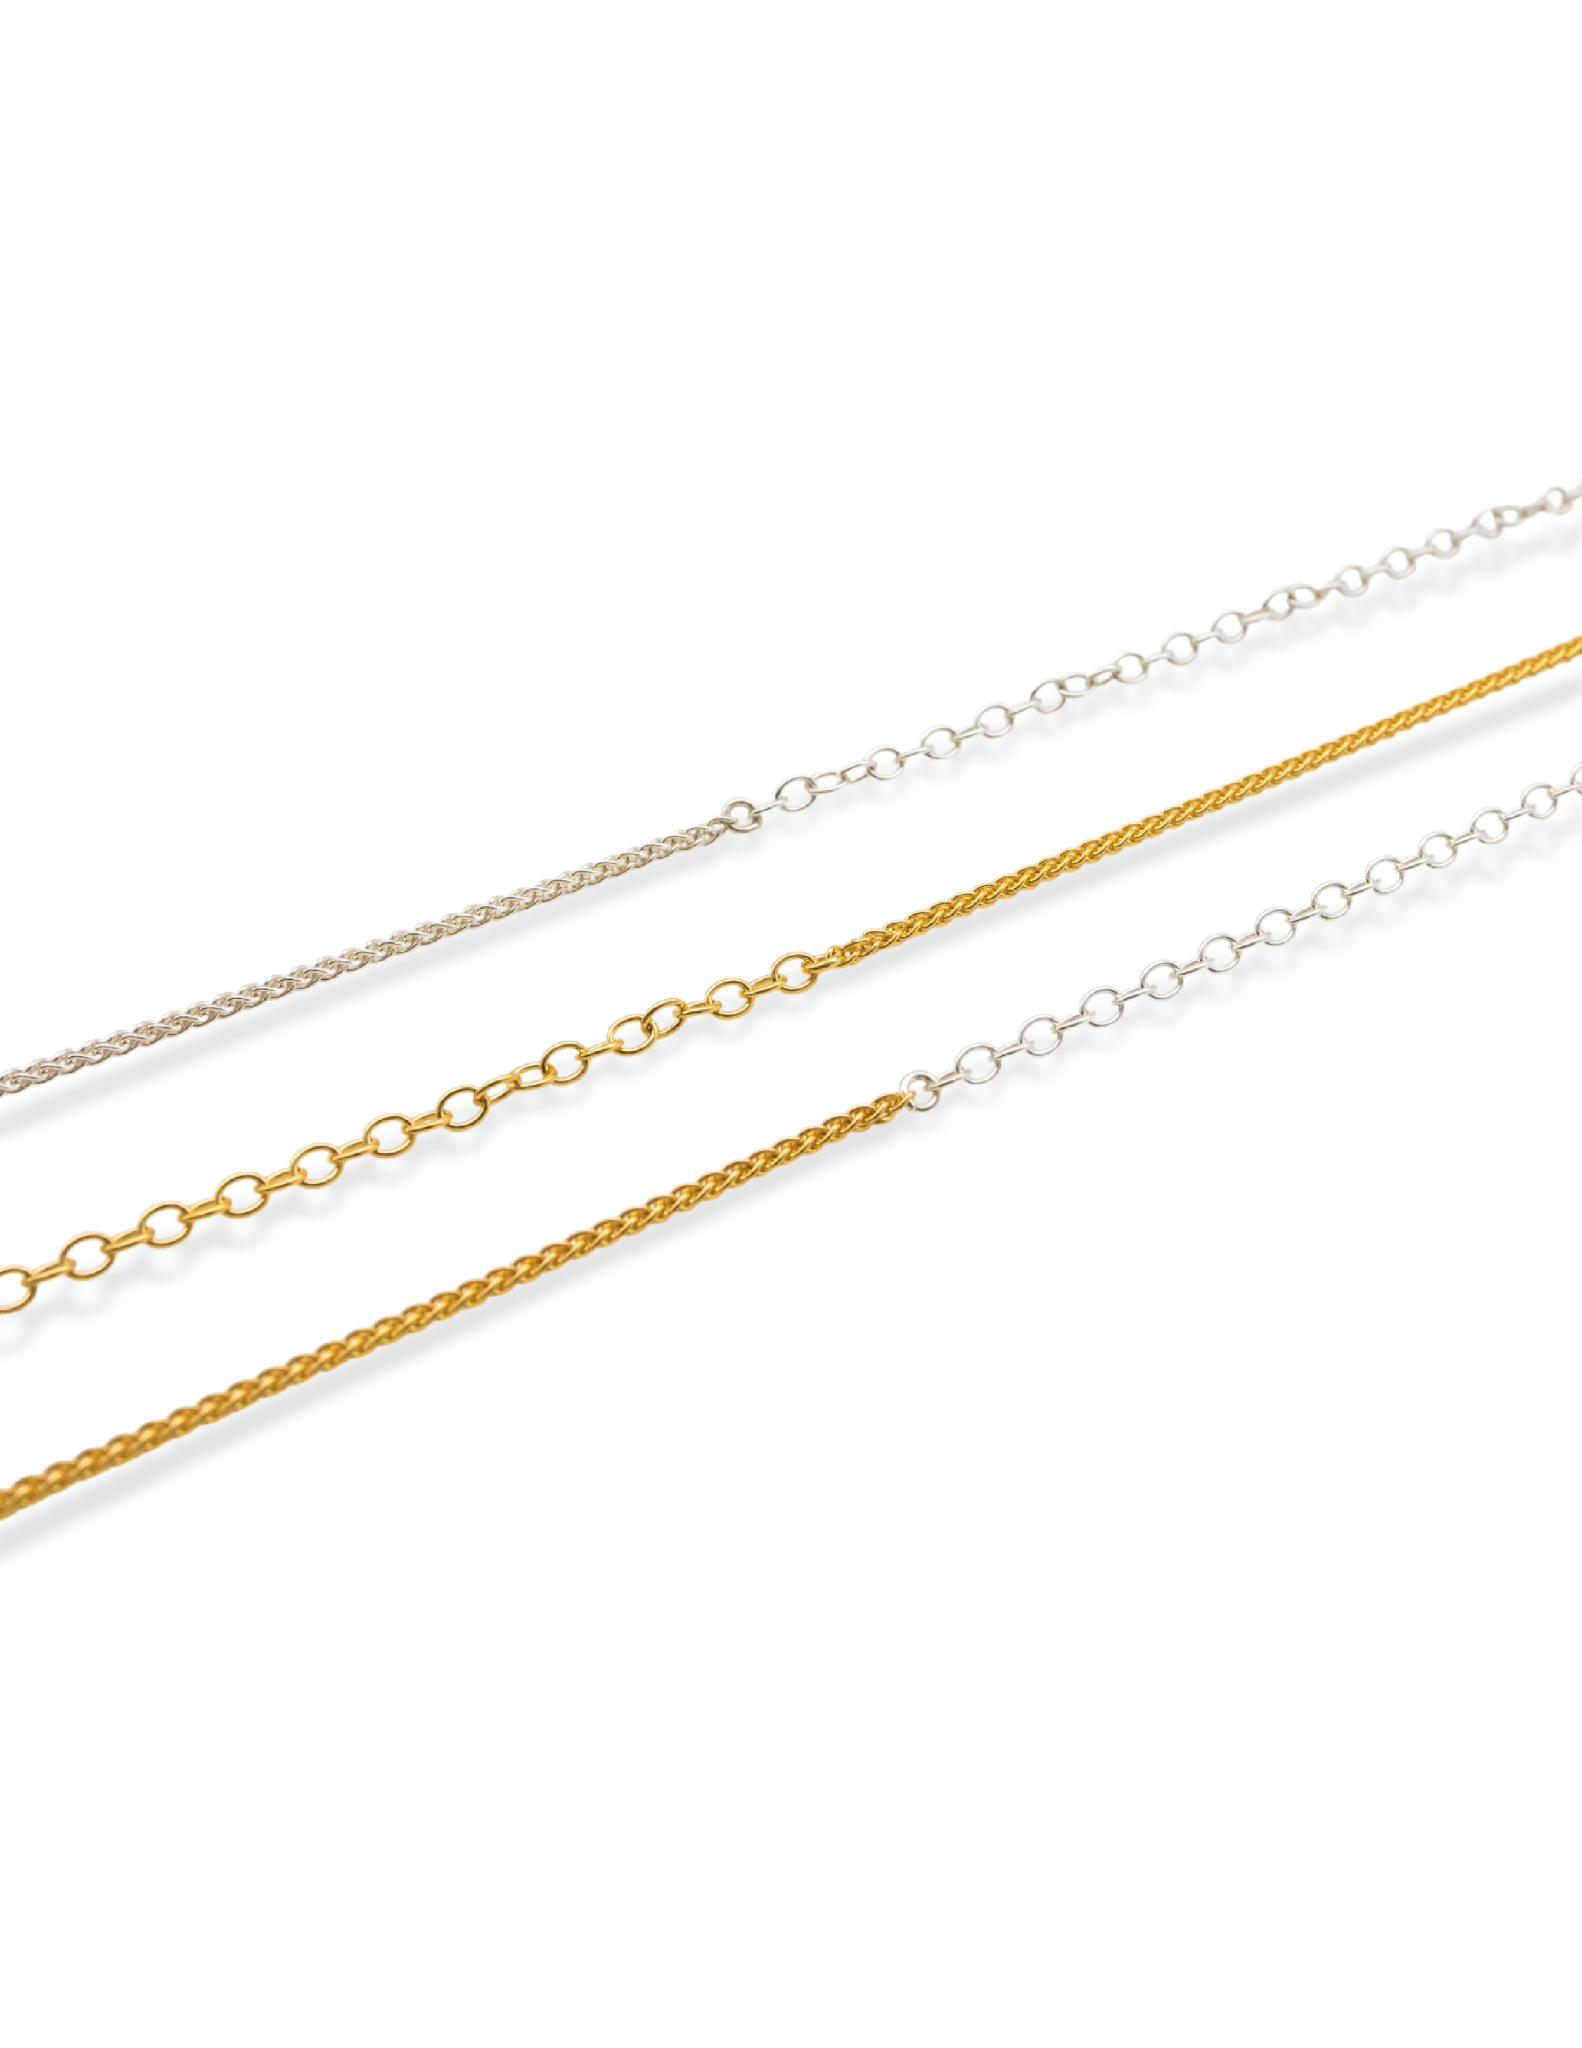 Kharys jewelry two tone double chain necklace in sterling silver and 18k gold vermeil